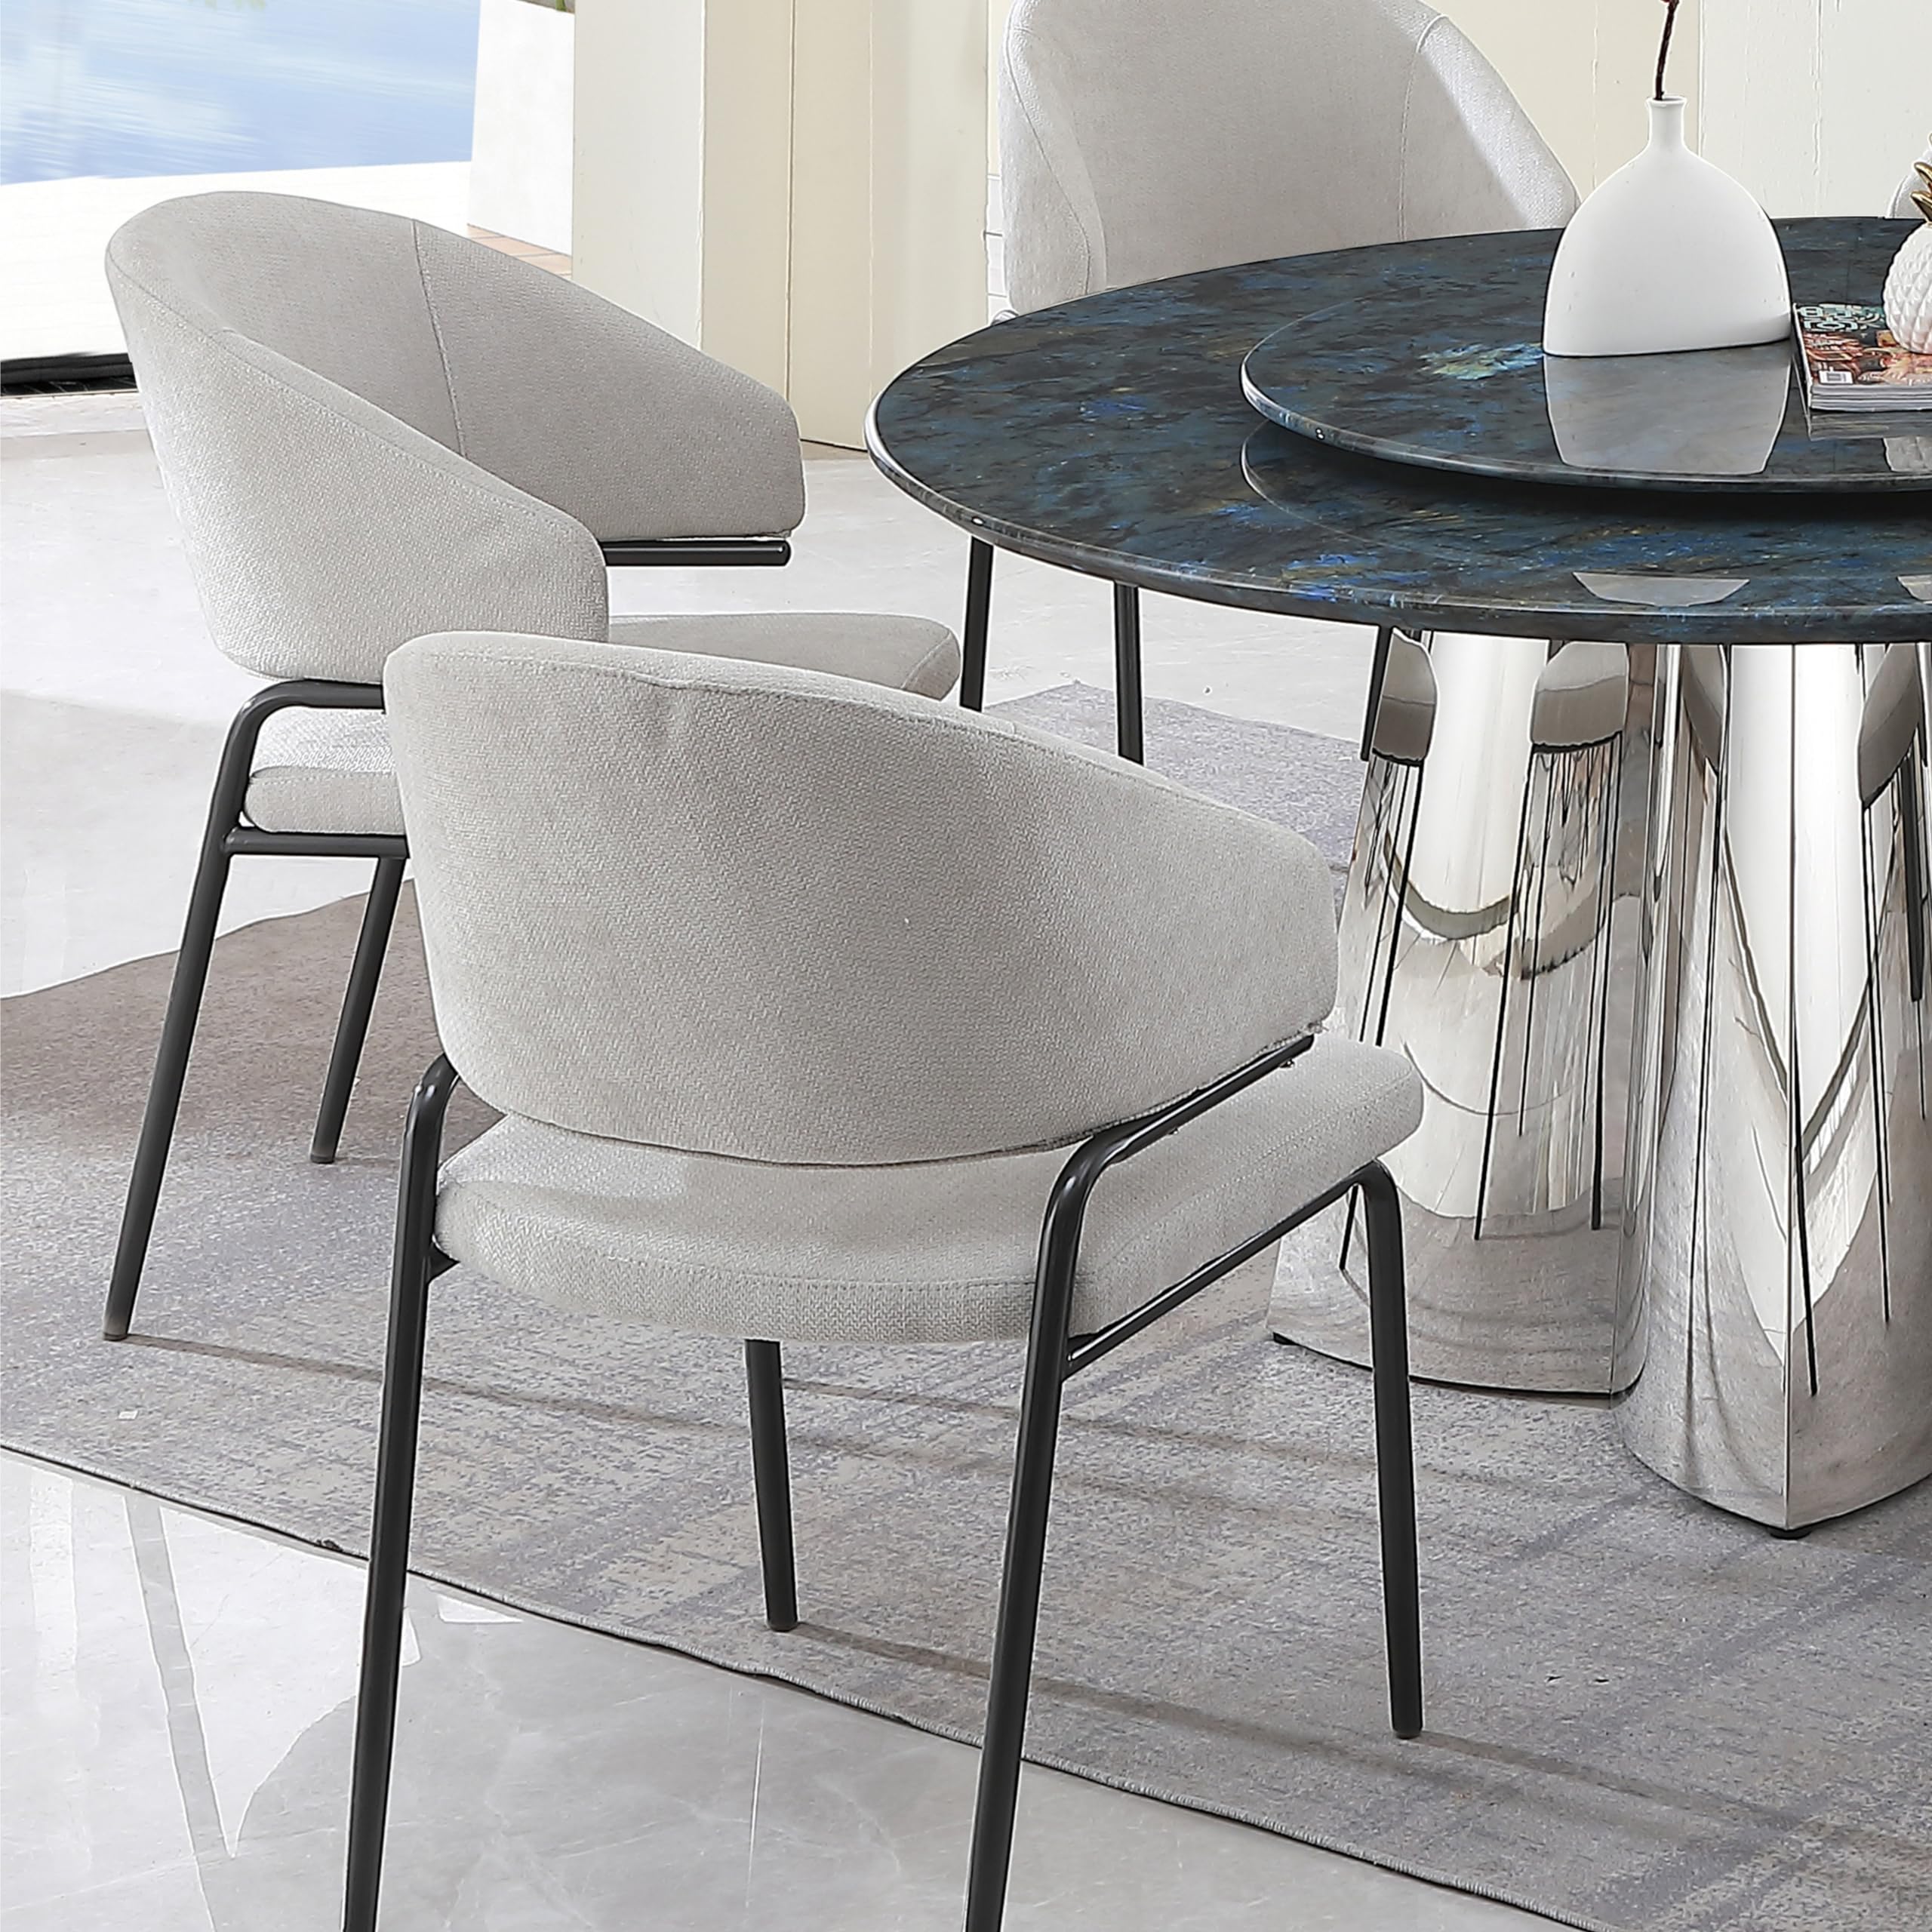 Montary 53.3" with 31.5" Round Turntable Metal Pedestal Sintered Stone Dining Table Set with 6 Pcs Fabric Chairs